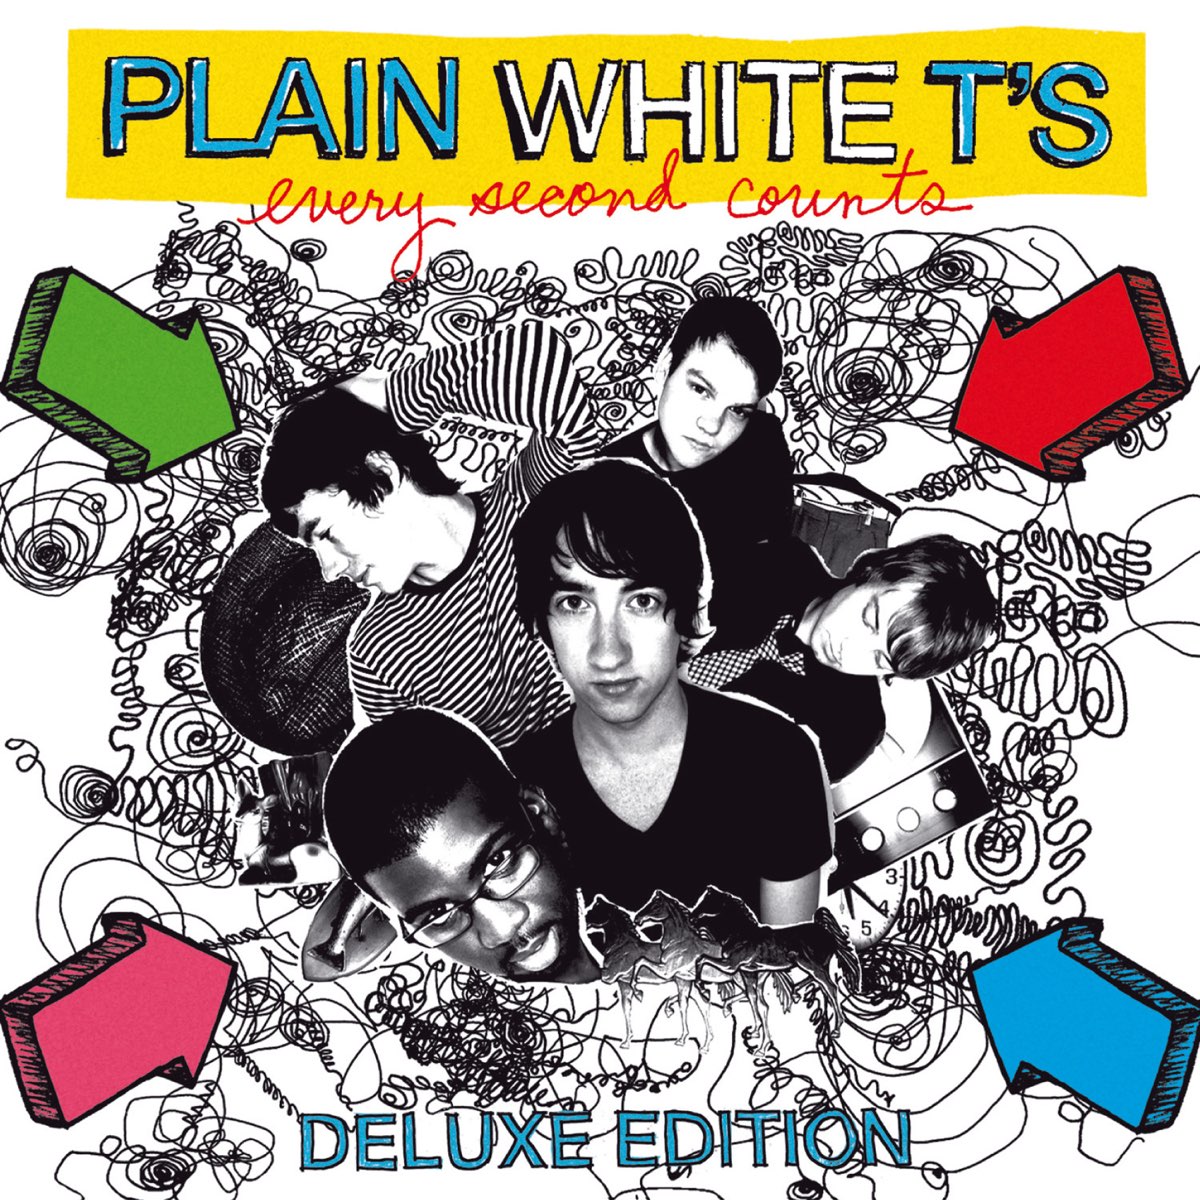 Whenever my favourite music comes the radio. Plain White t's. Every second counts.